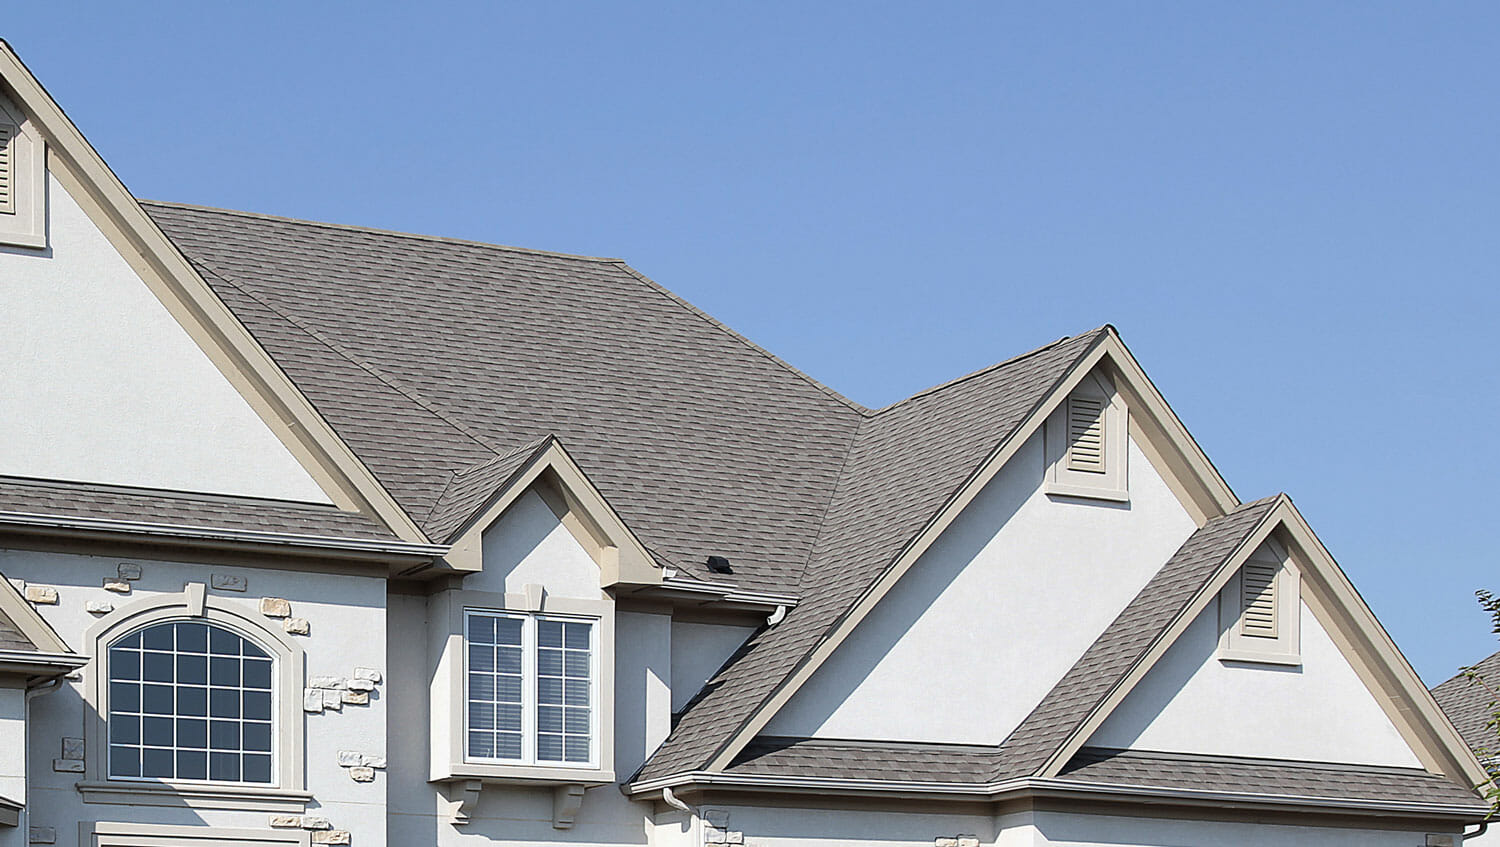 Roofing services in Acworth, GA